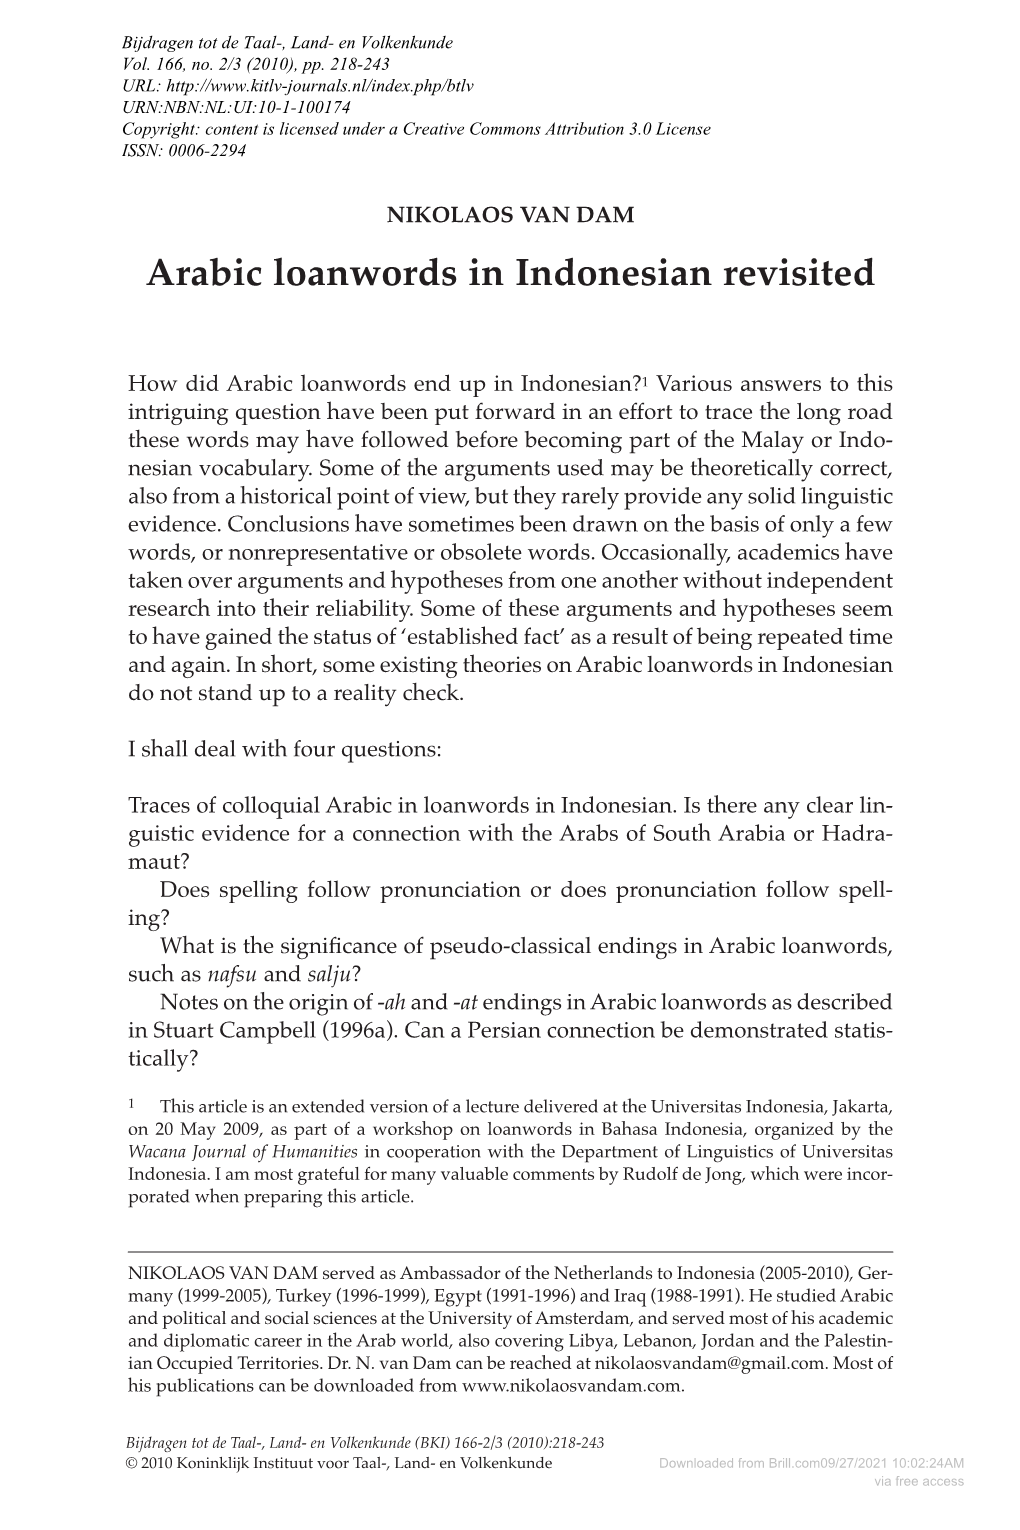 Arabic Loanwords in Indonesian Revisited